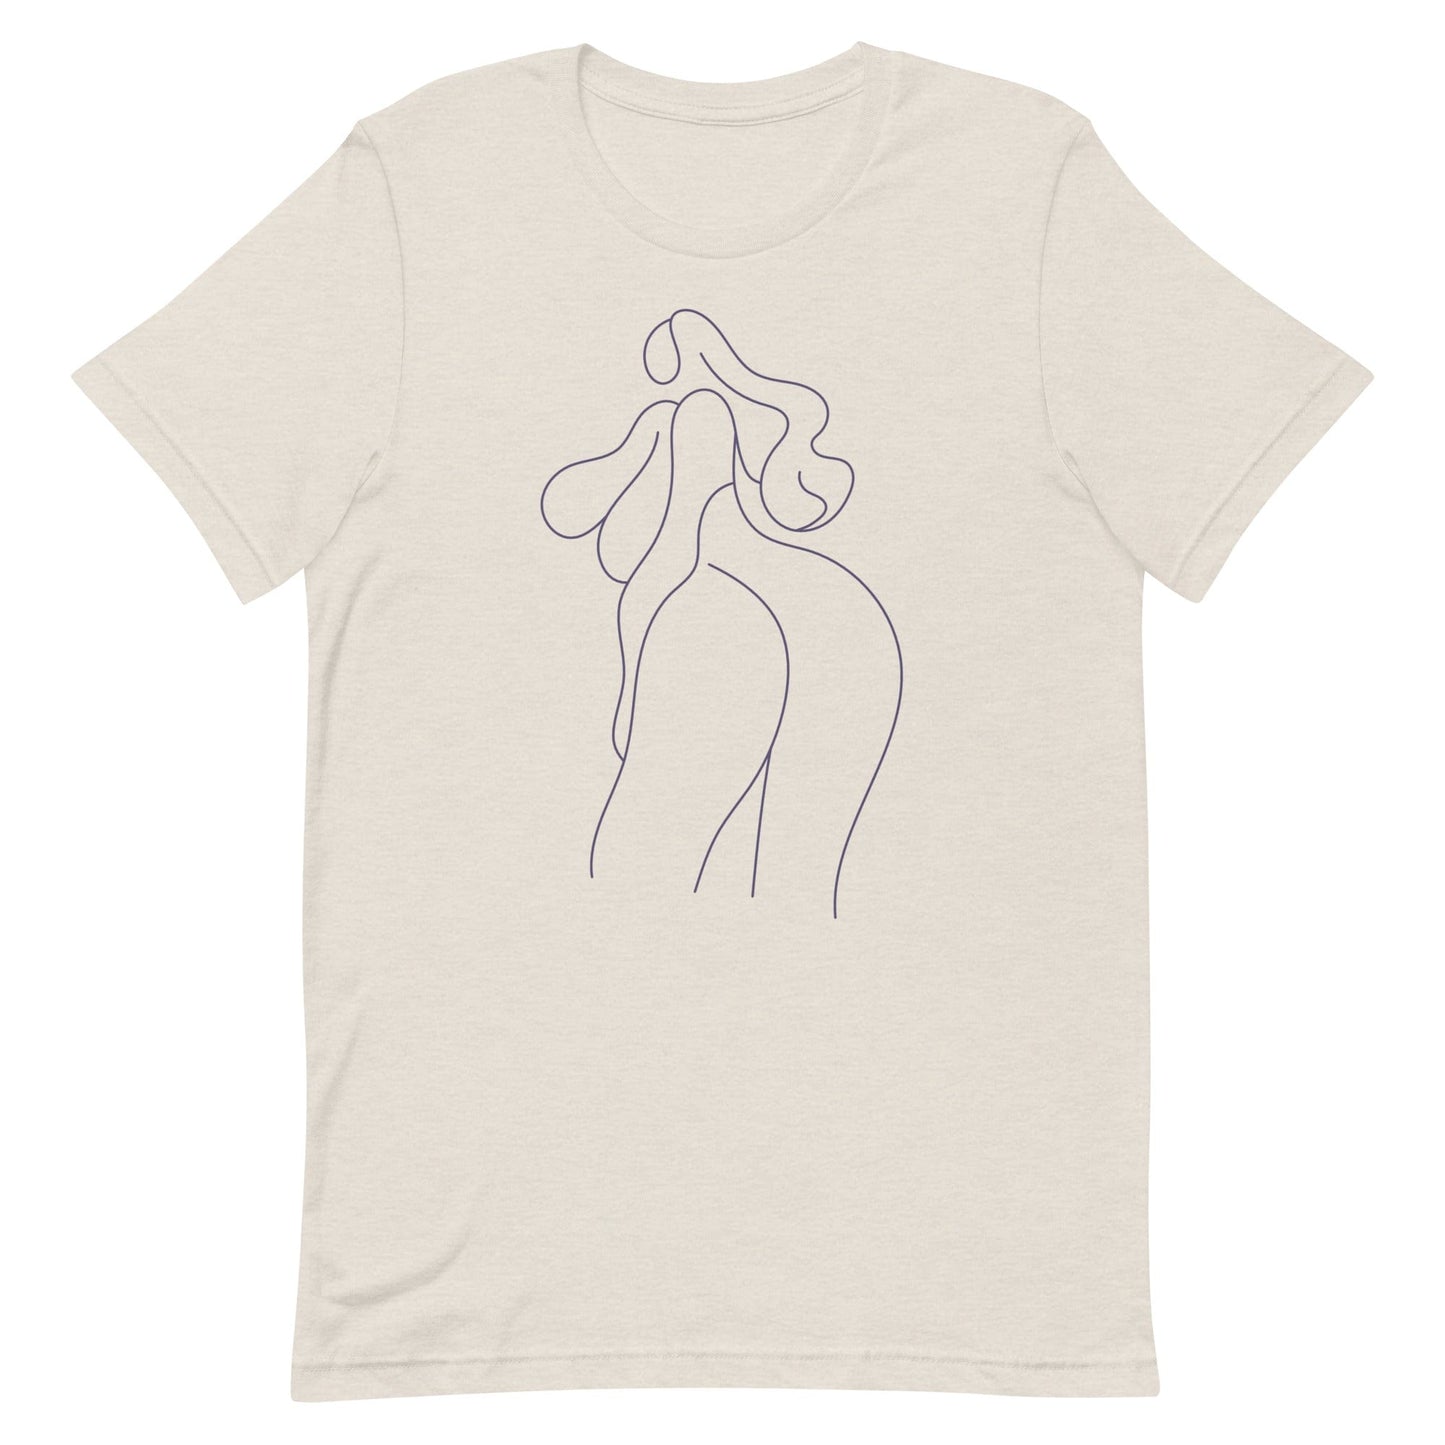 drawing-female-body-tshirt-apparel-at-feminist-define-dust-front